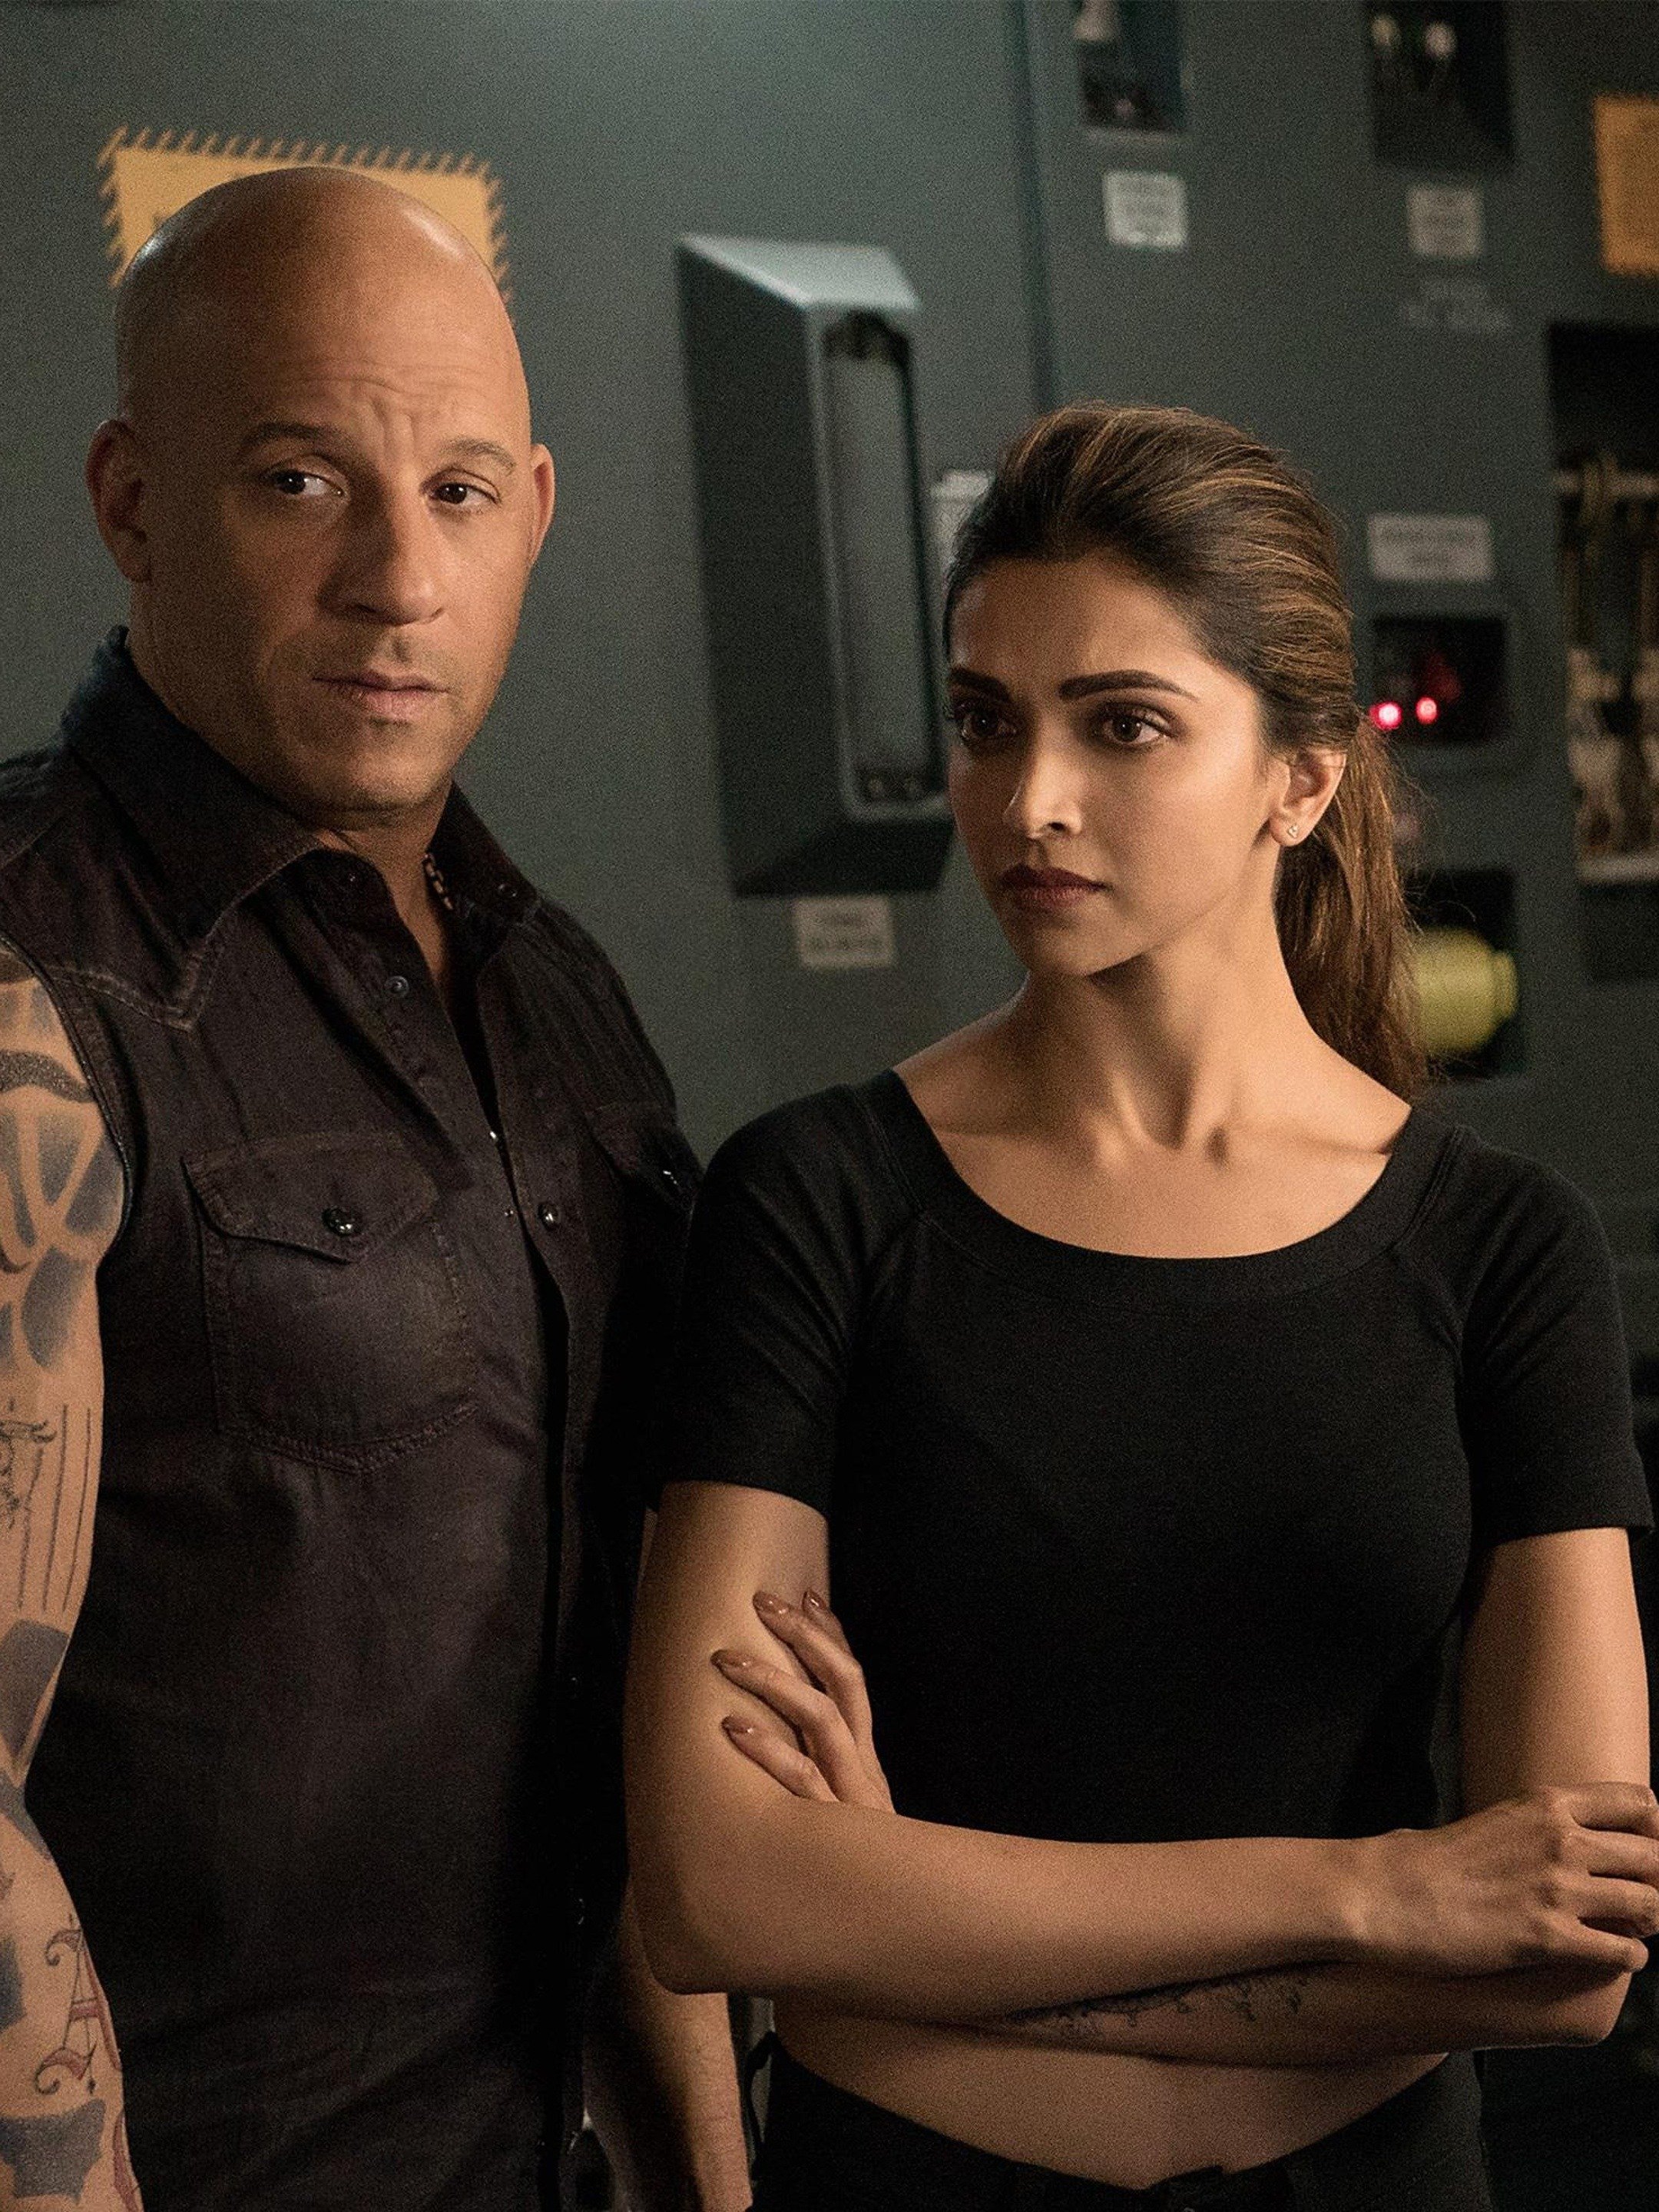 Xxx Video Is 13yars Com - xXx: Return of Xander Cage - Rotten Tomatoes